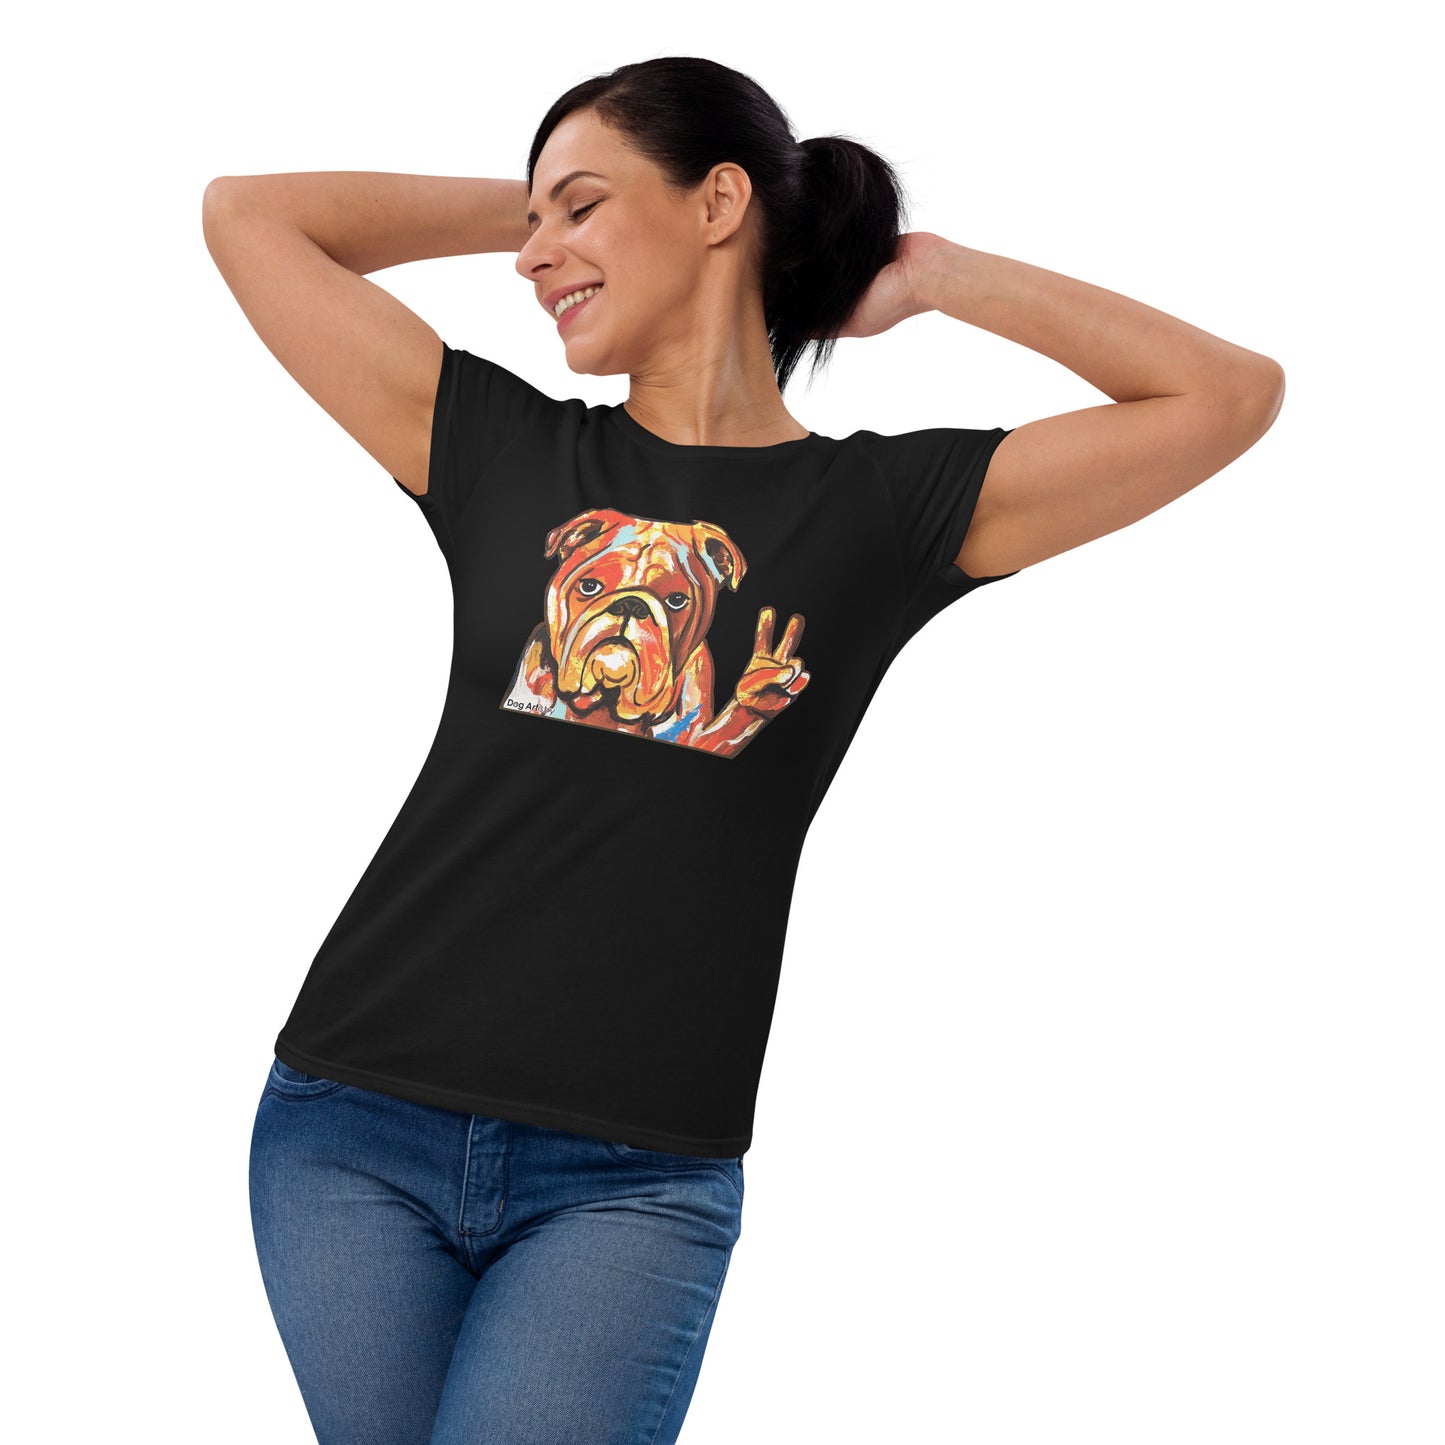 English Bull Terrier doing the peace sign women's t-shirt black by Dog Artistry